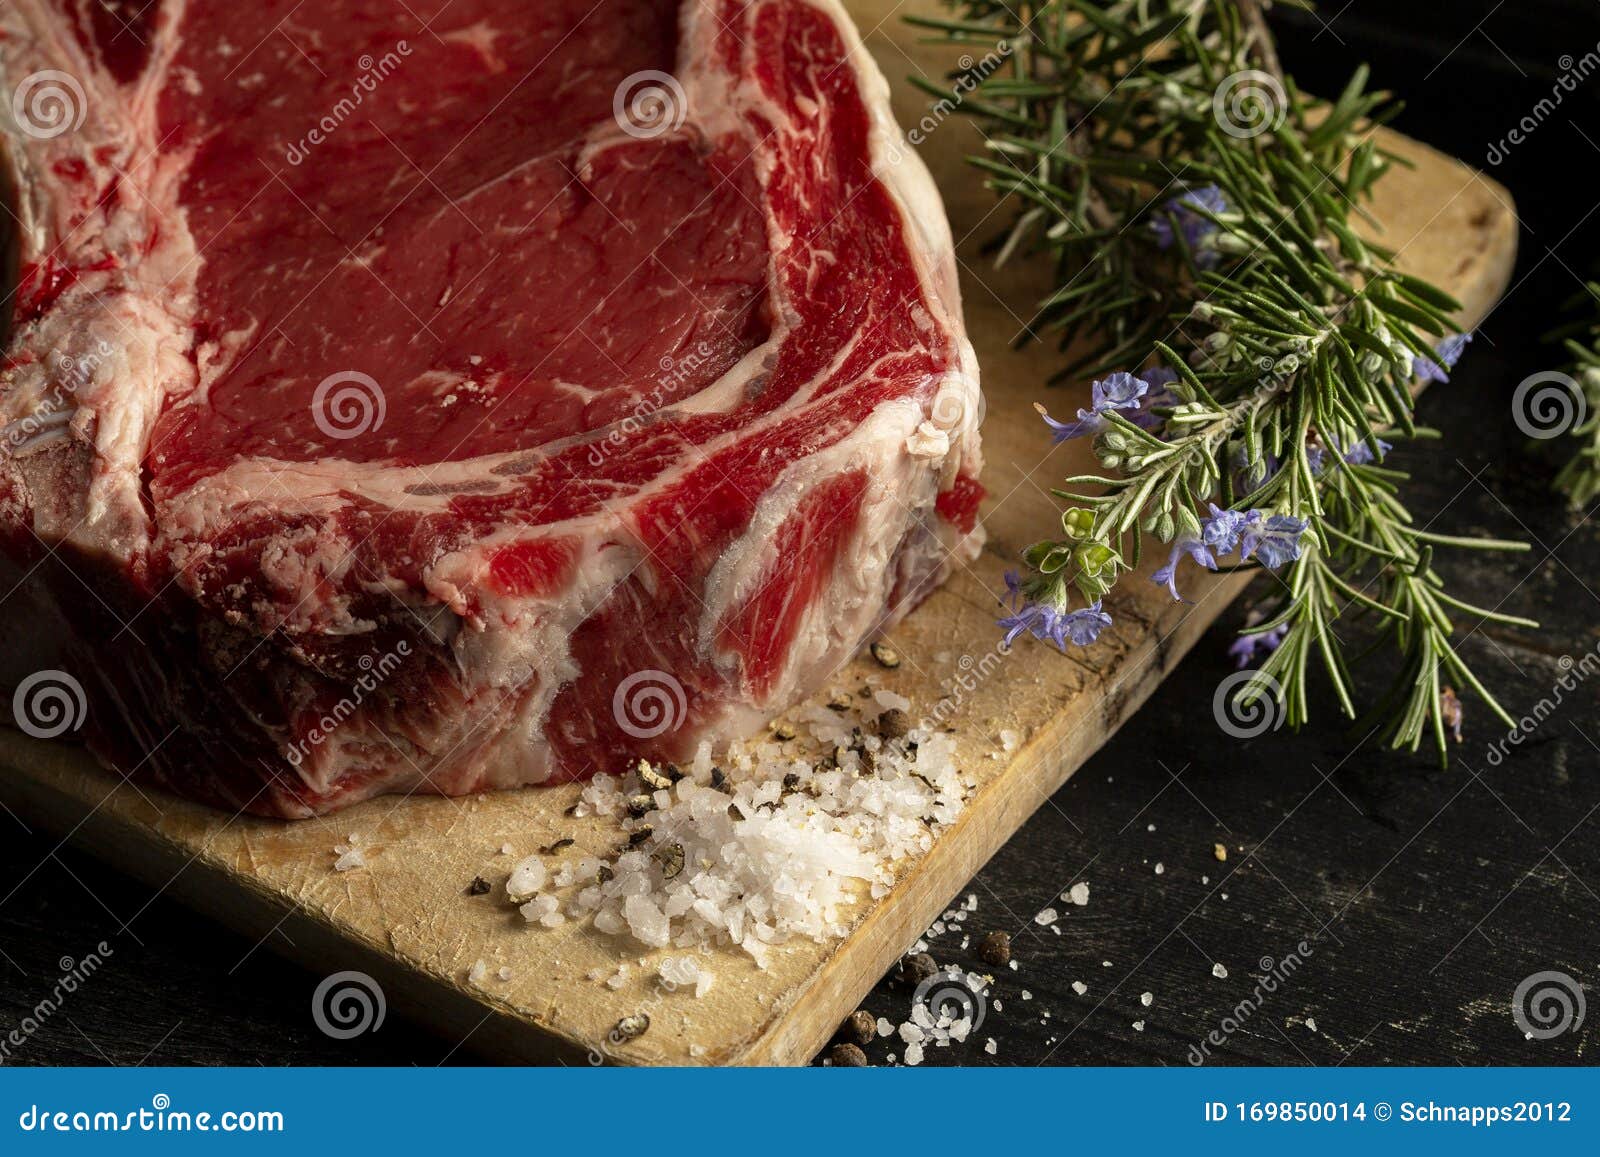 A Raw Beef Chop on a Chopping Board Stock Photo - Image of uncooked ...